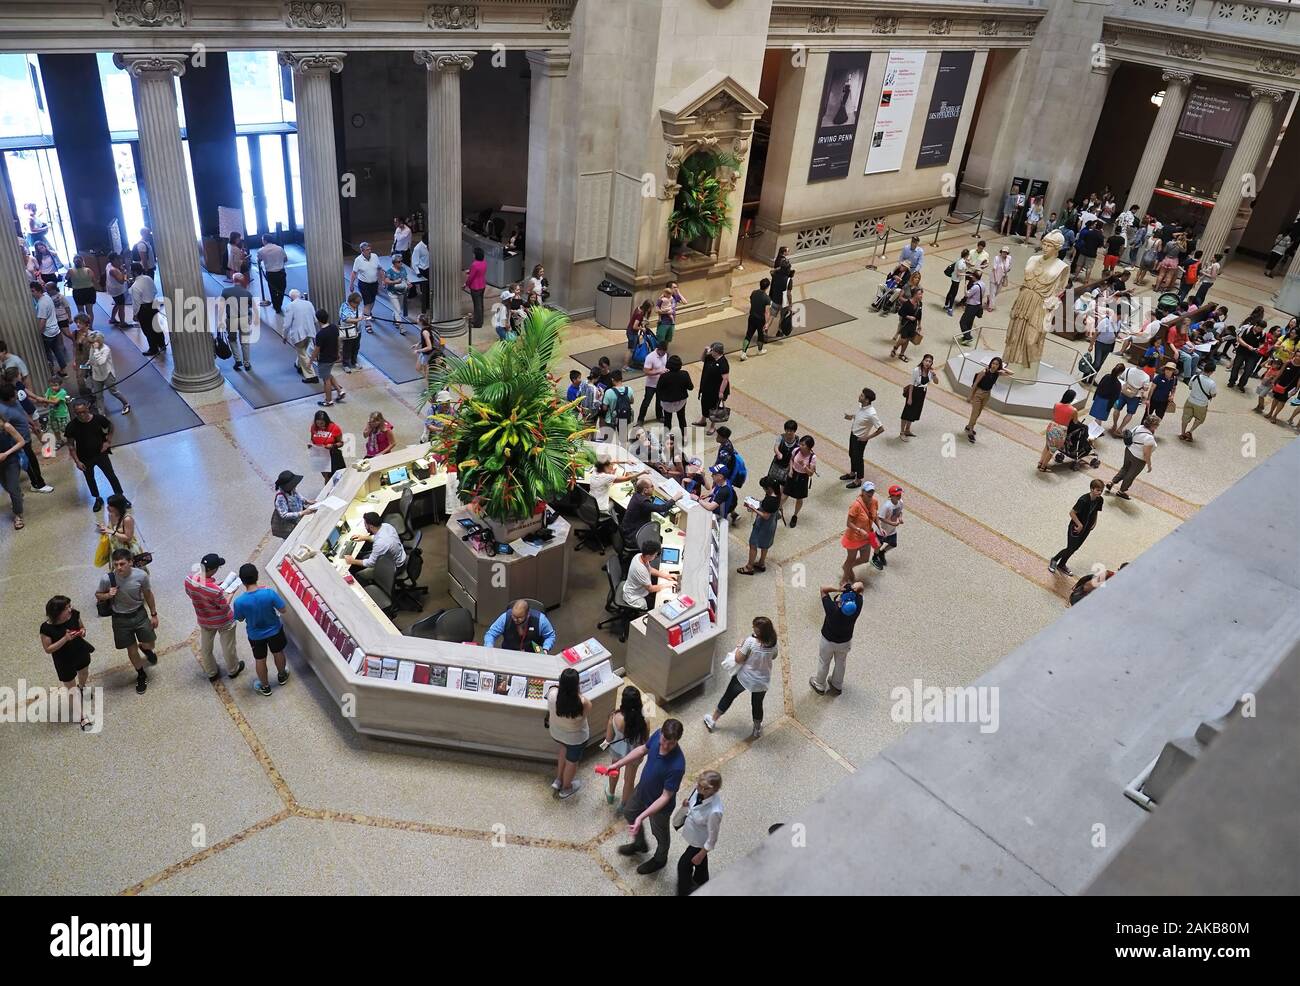 New York City, NY USA. Jul 2017. Second floor view of the lobby, people, and visitor center of the Metropolitan Museum of Art in NYC. Stock Photo